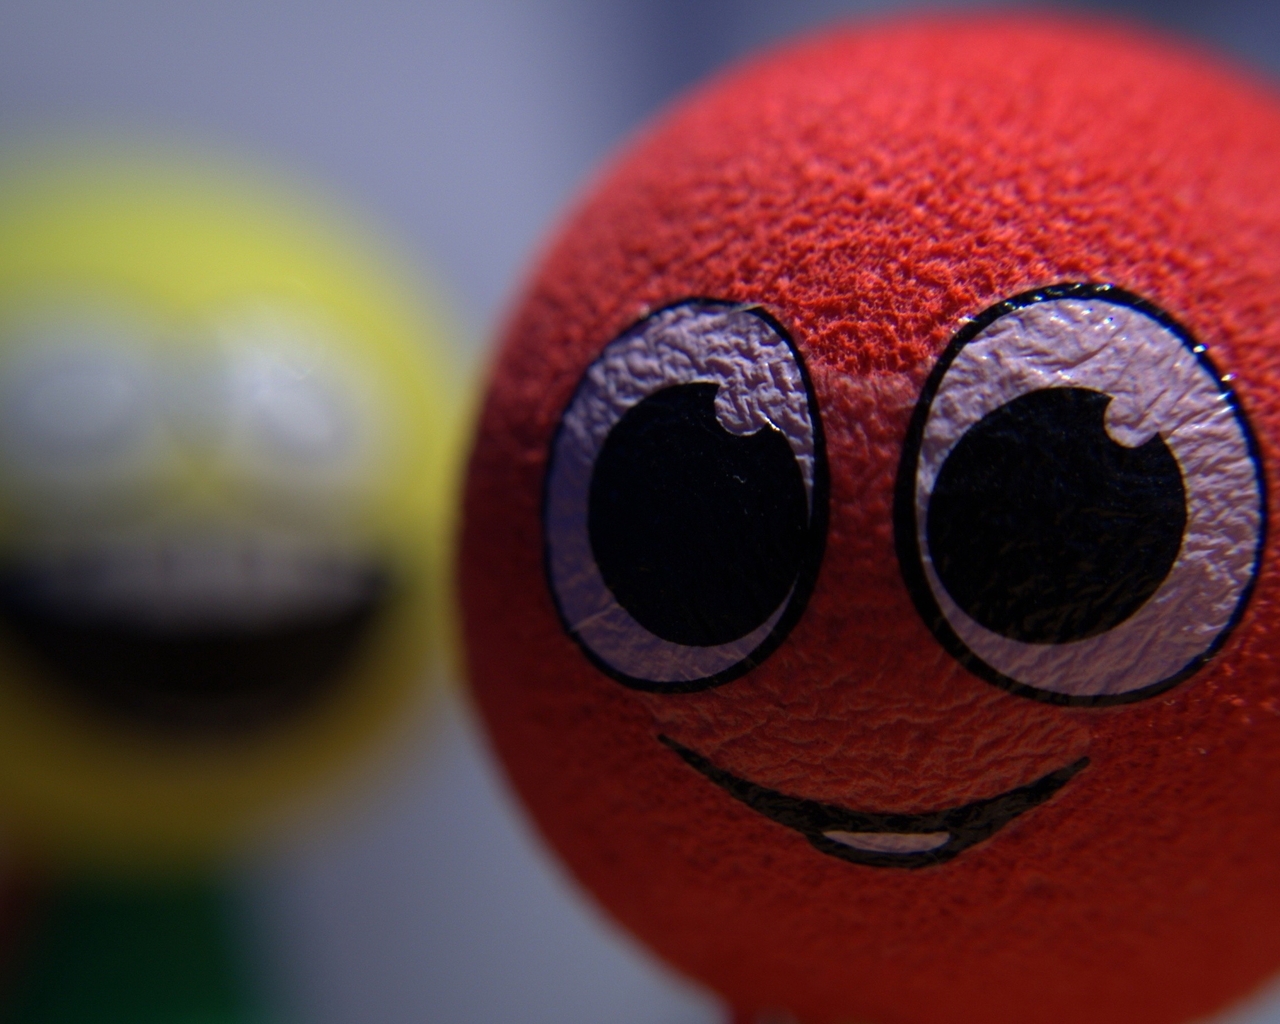 Smiley Ball for 1280 x 1024 resolution